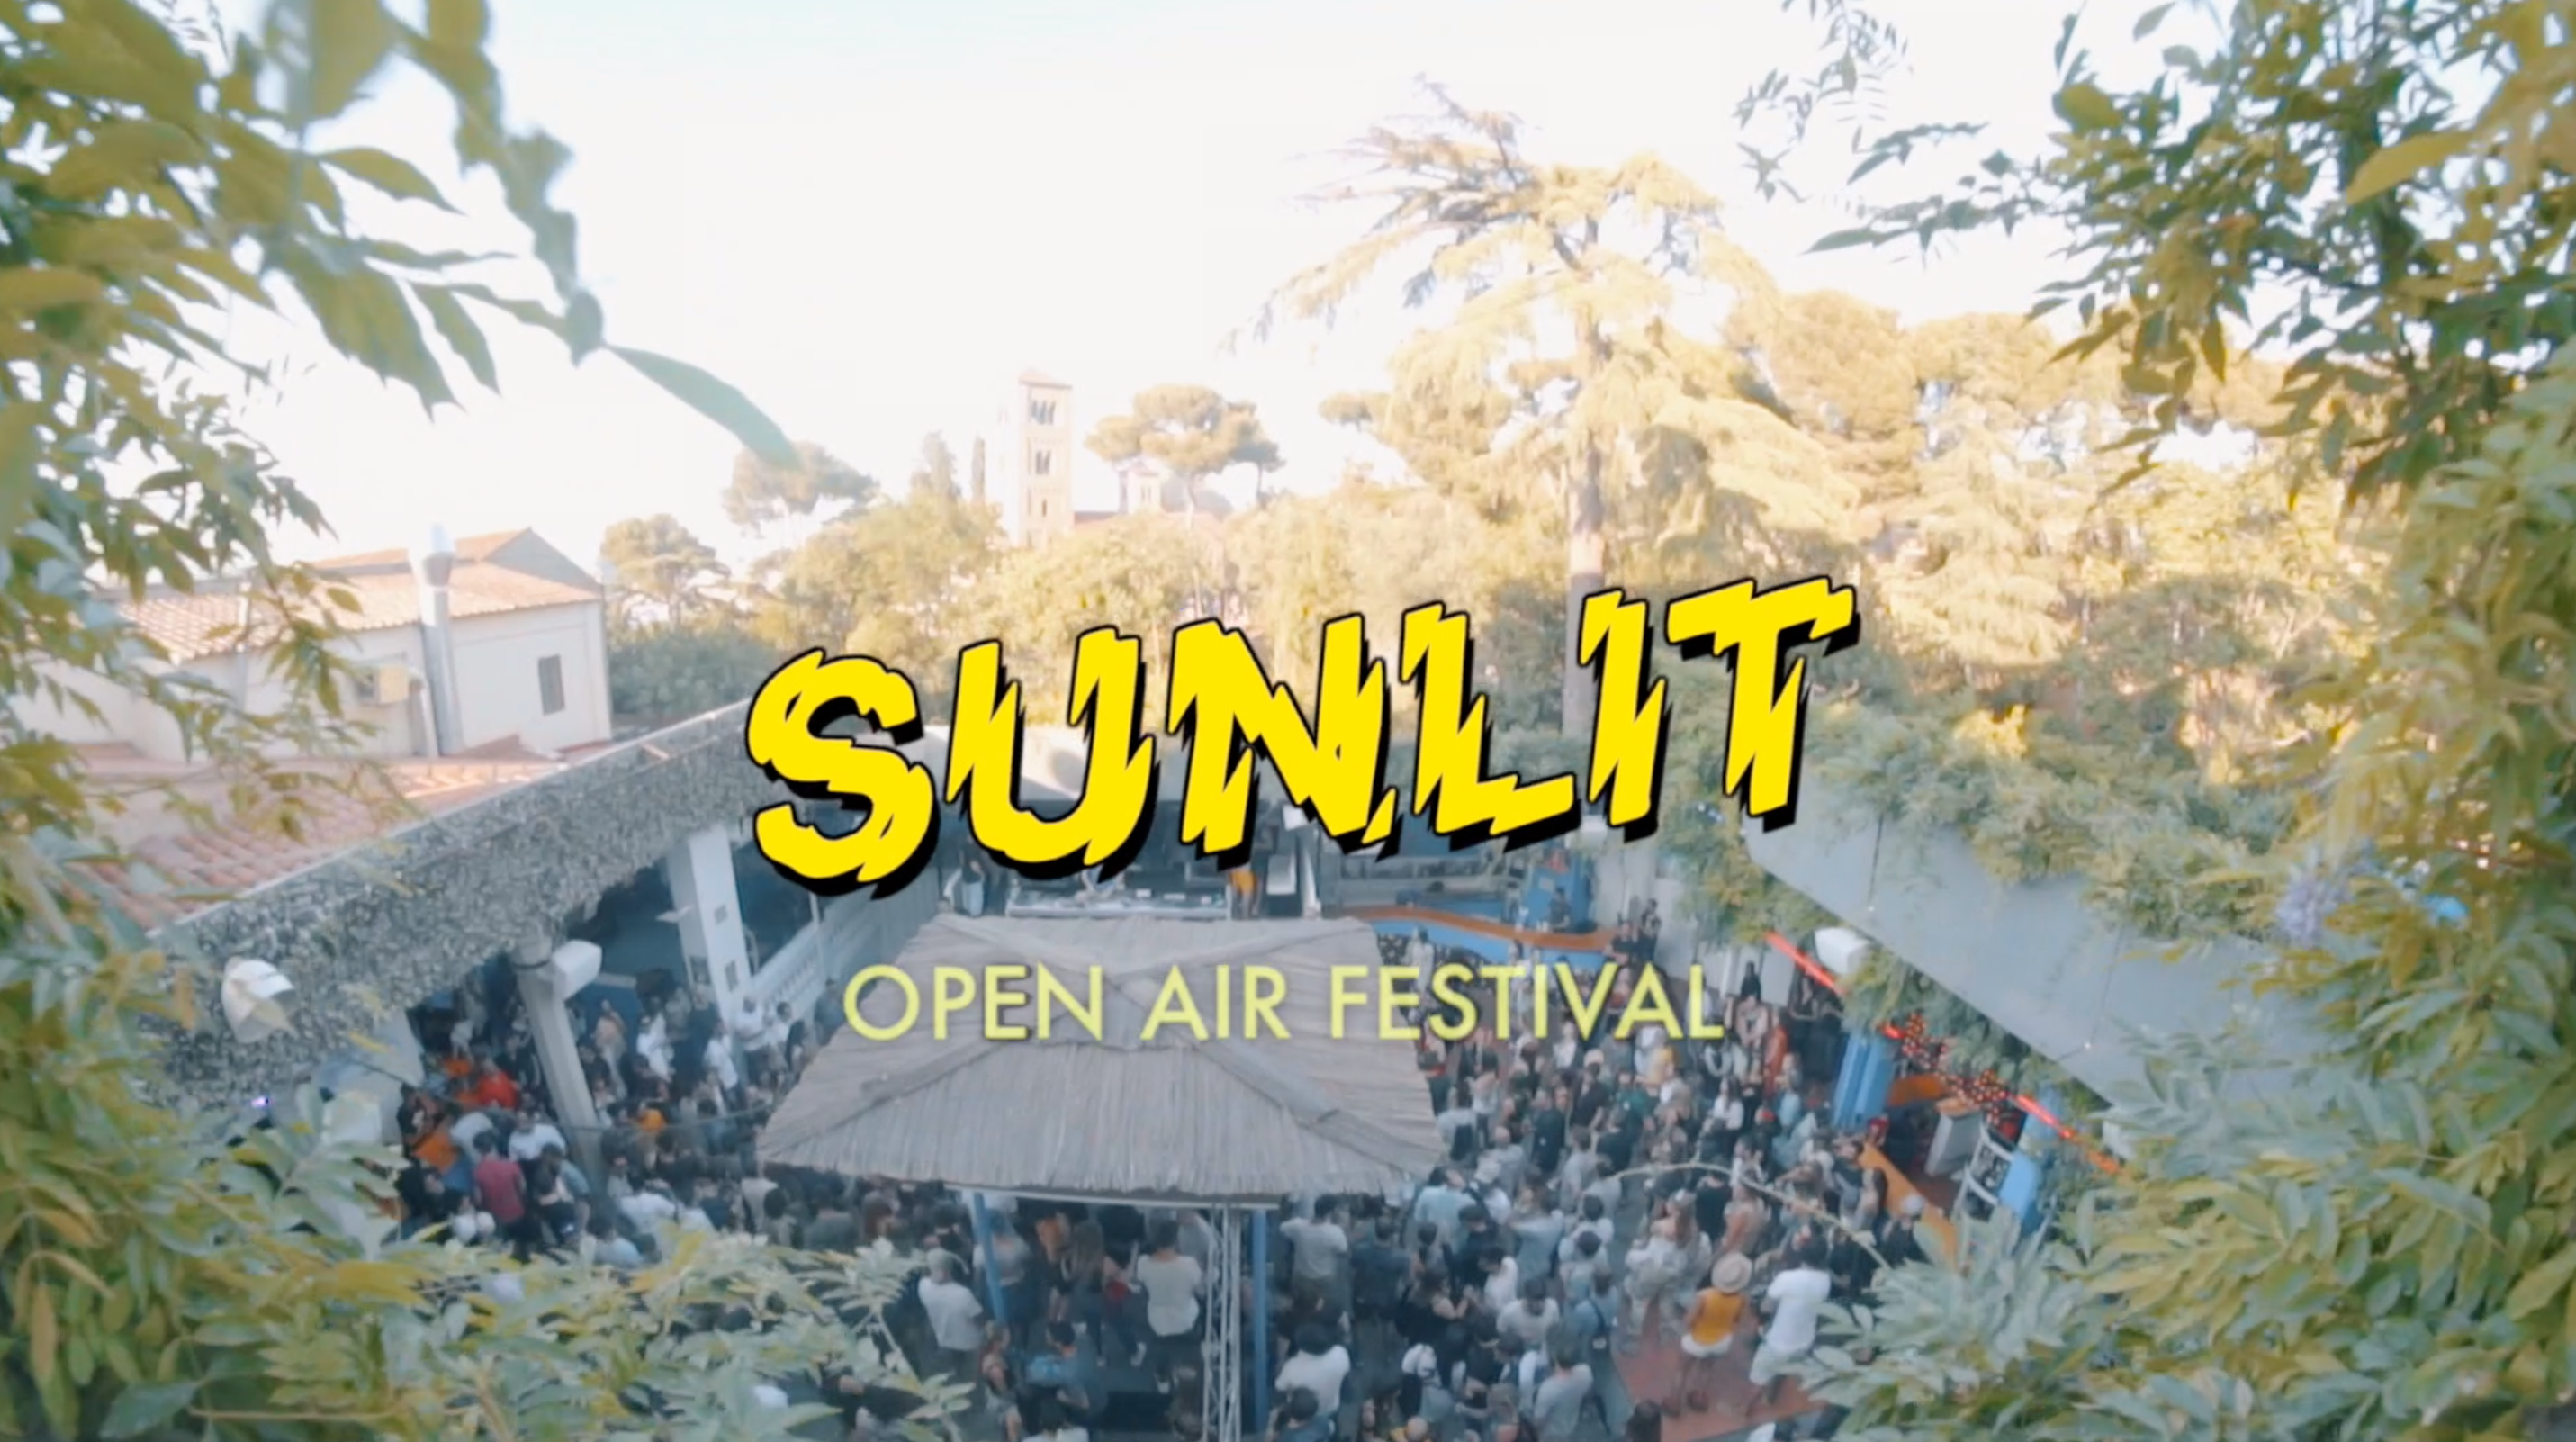 SUNLIT Open-Air FESTIVAL pres. Juarez 'All day Long' [Daytime Party + Night Club] - Flyer front